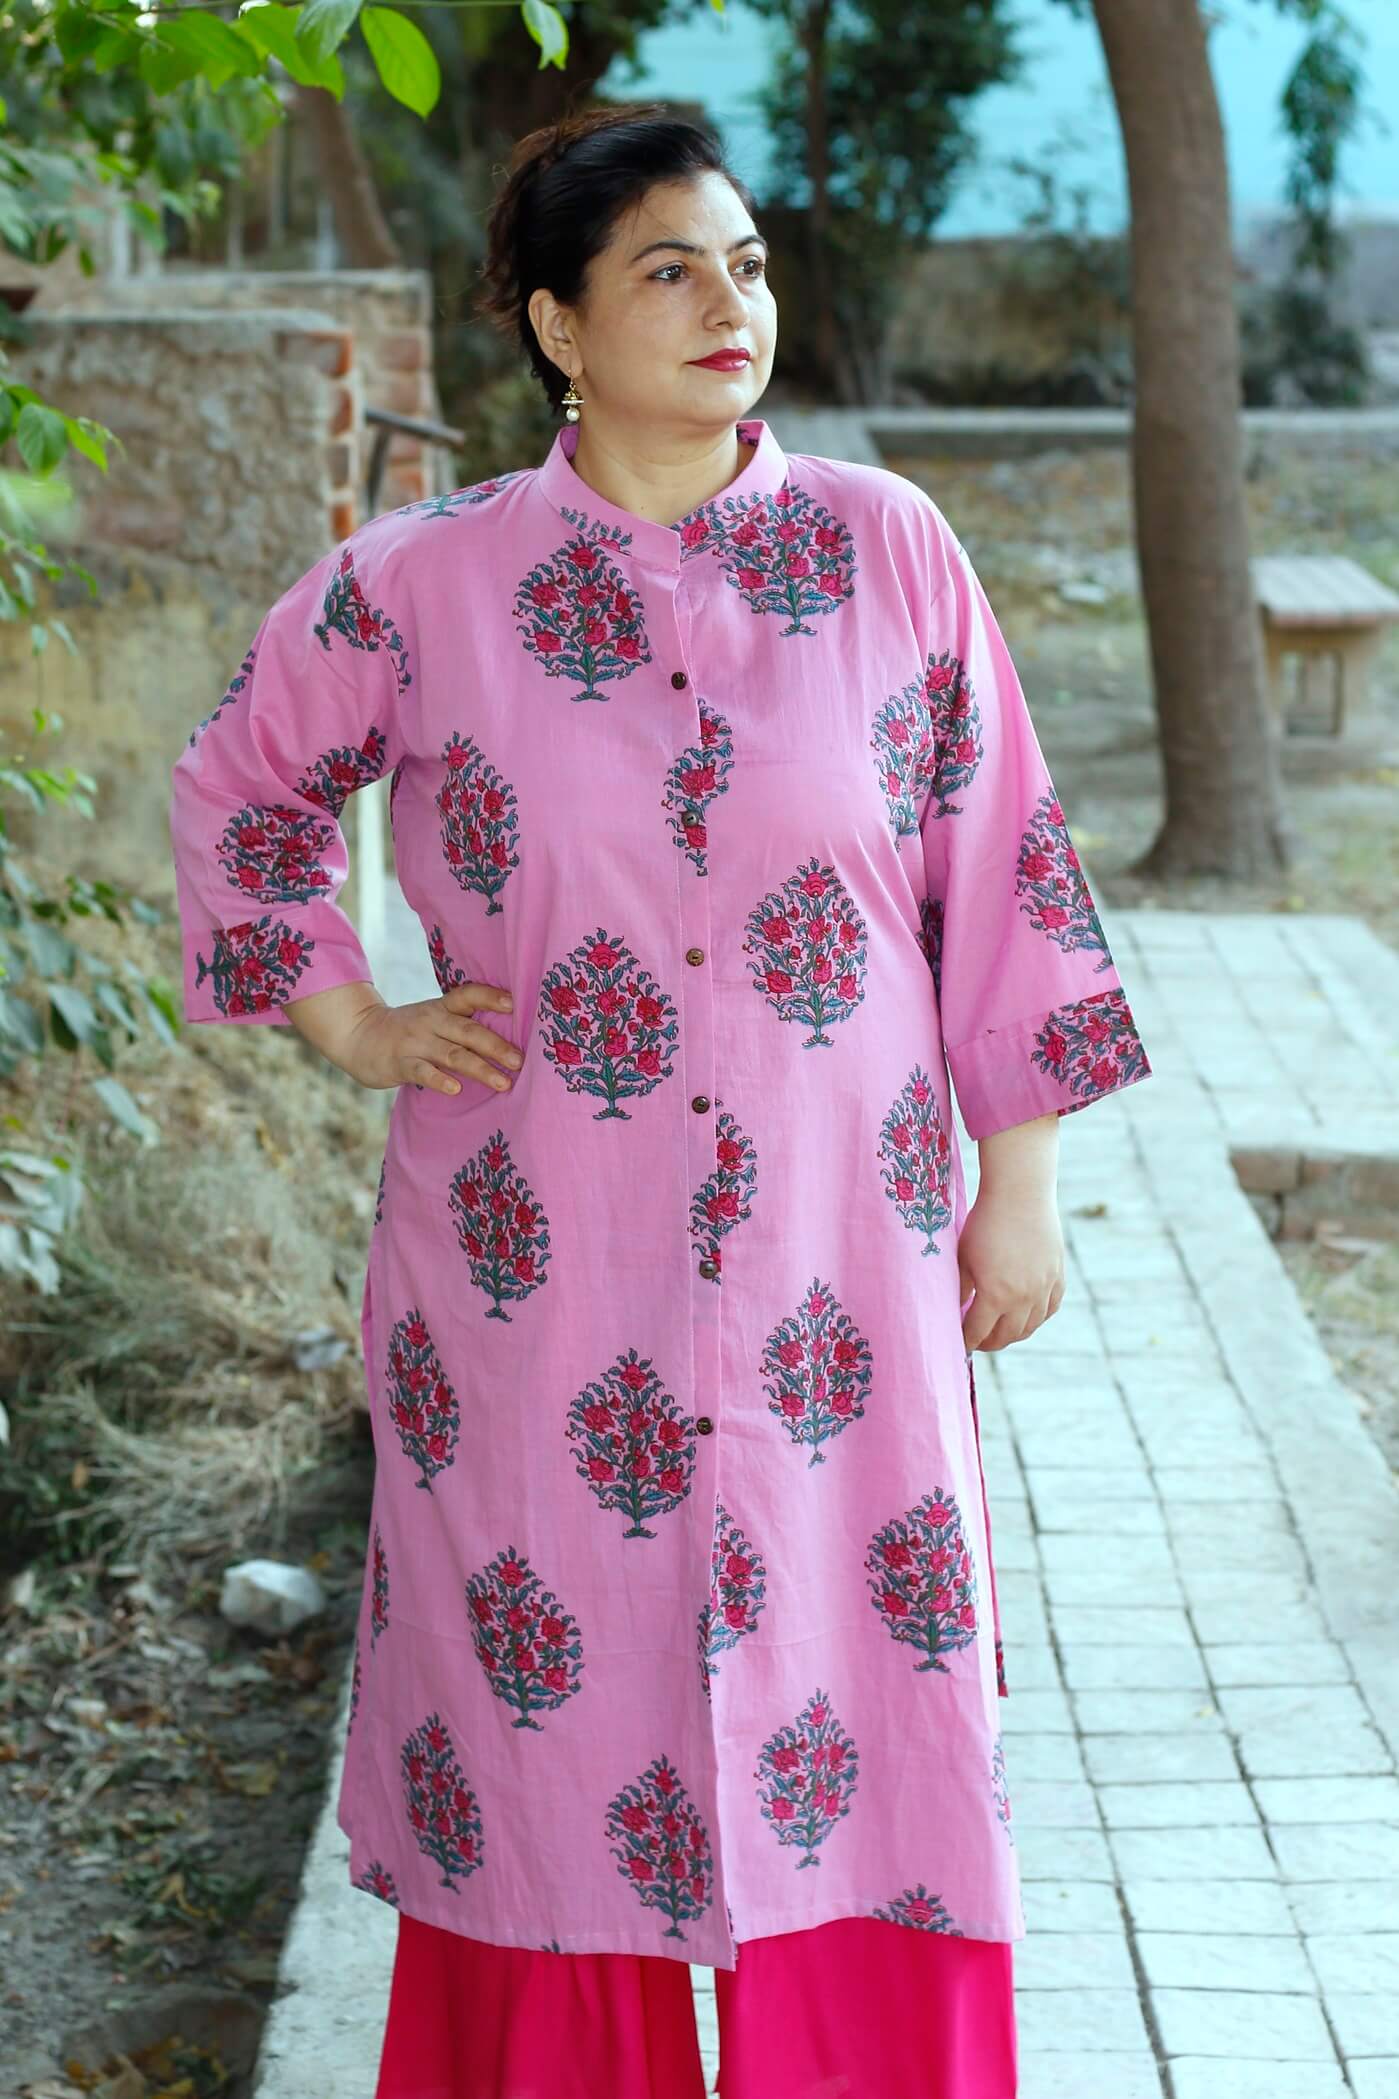 Shop Now Pink Lining Kaftan for Plus Size » 𝗔𝗗𝗜𝗥𝗜𝗖𝗛𝗔